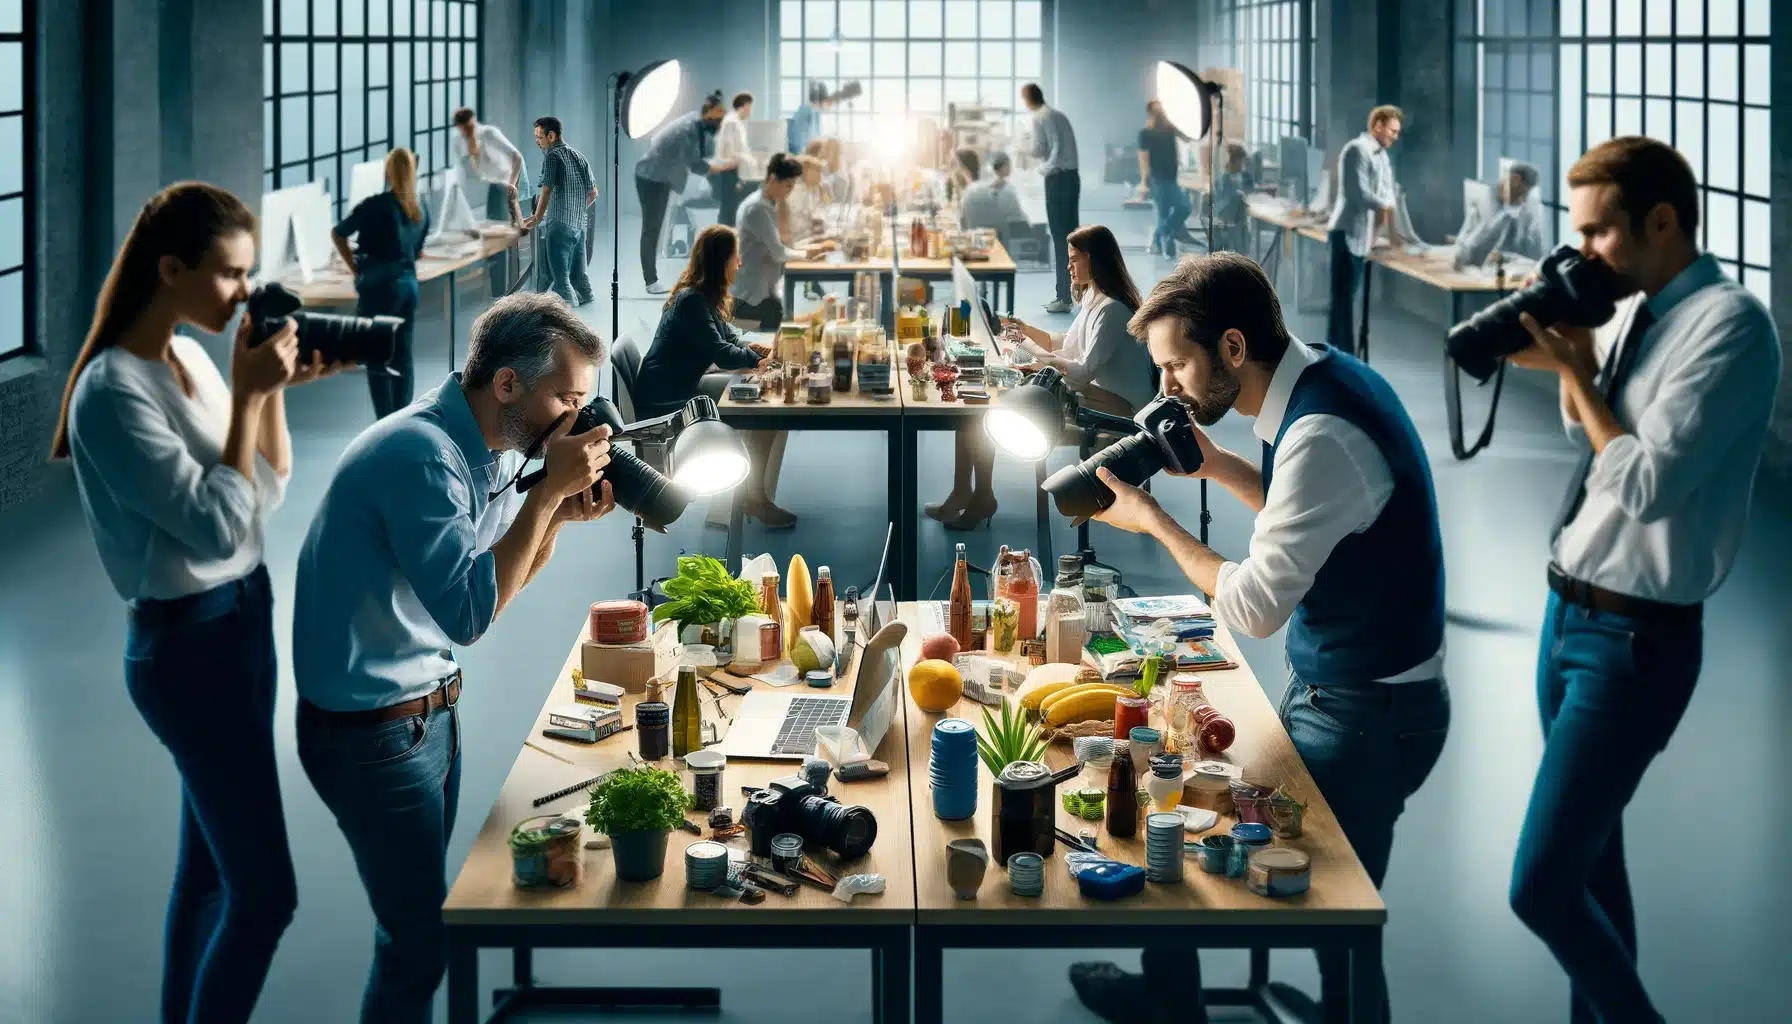 Two photographers in an office capturing Stuff images on separate tables while discussing with colleagues, amid a busy workplace atmosphere.